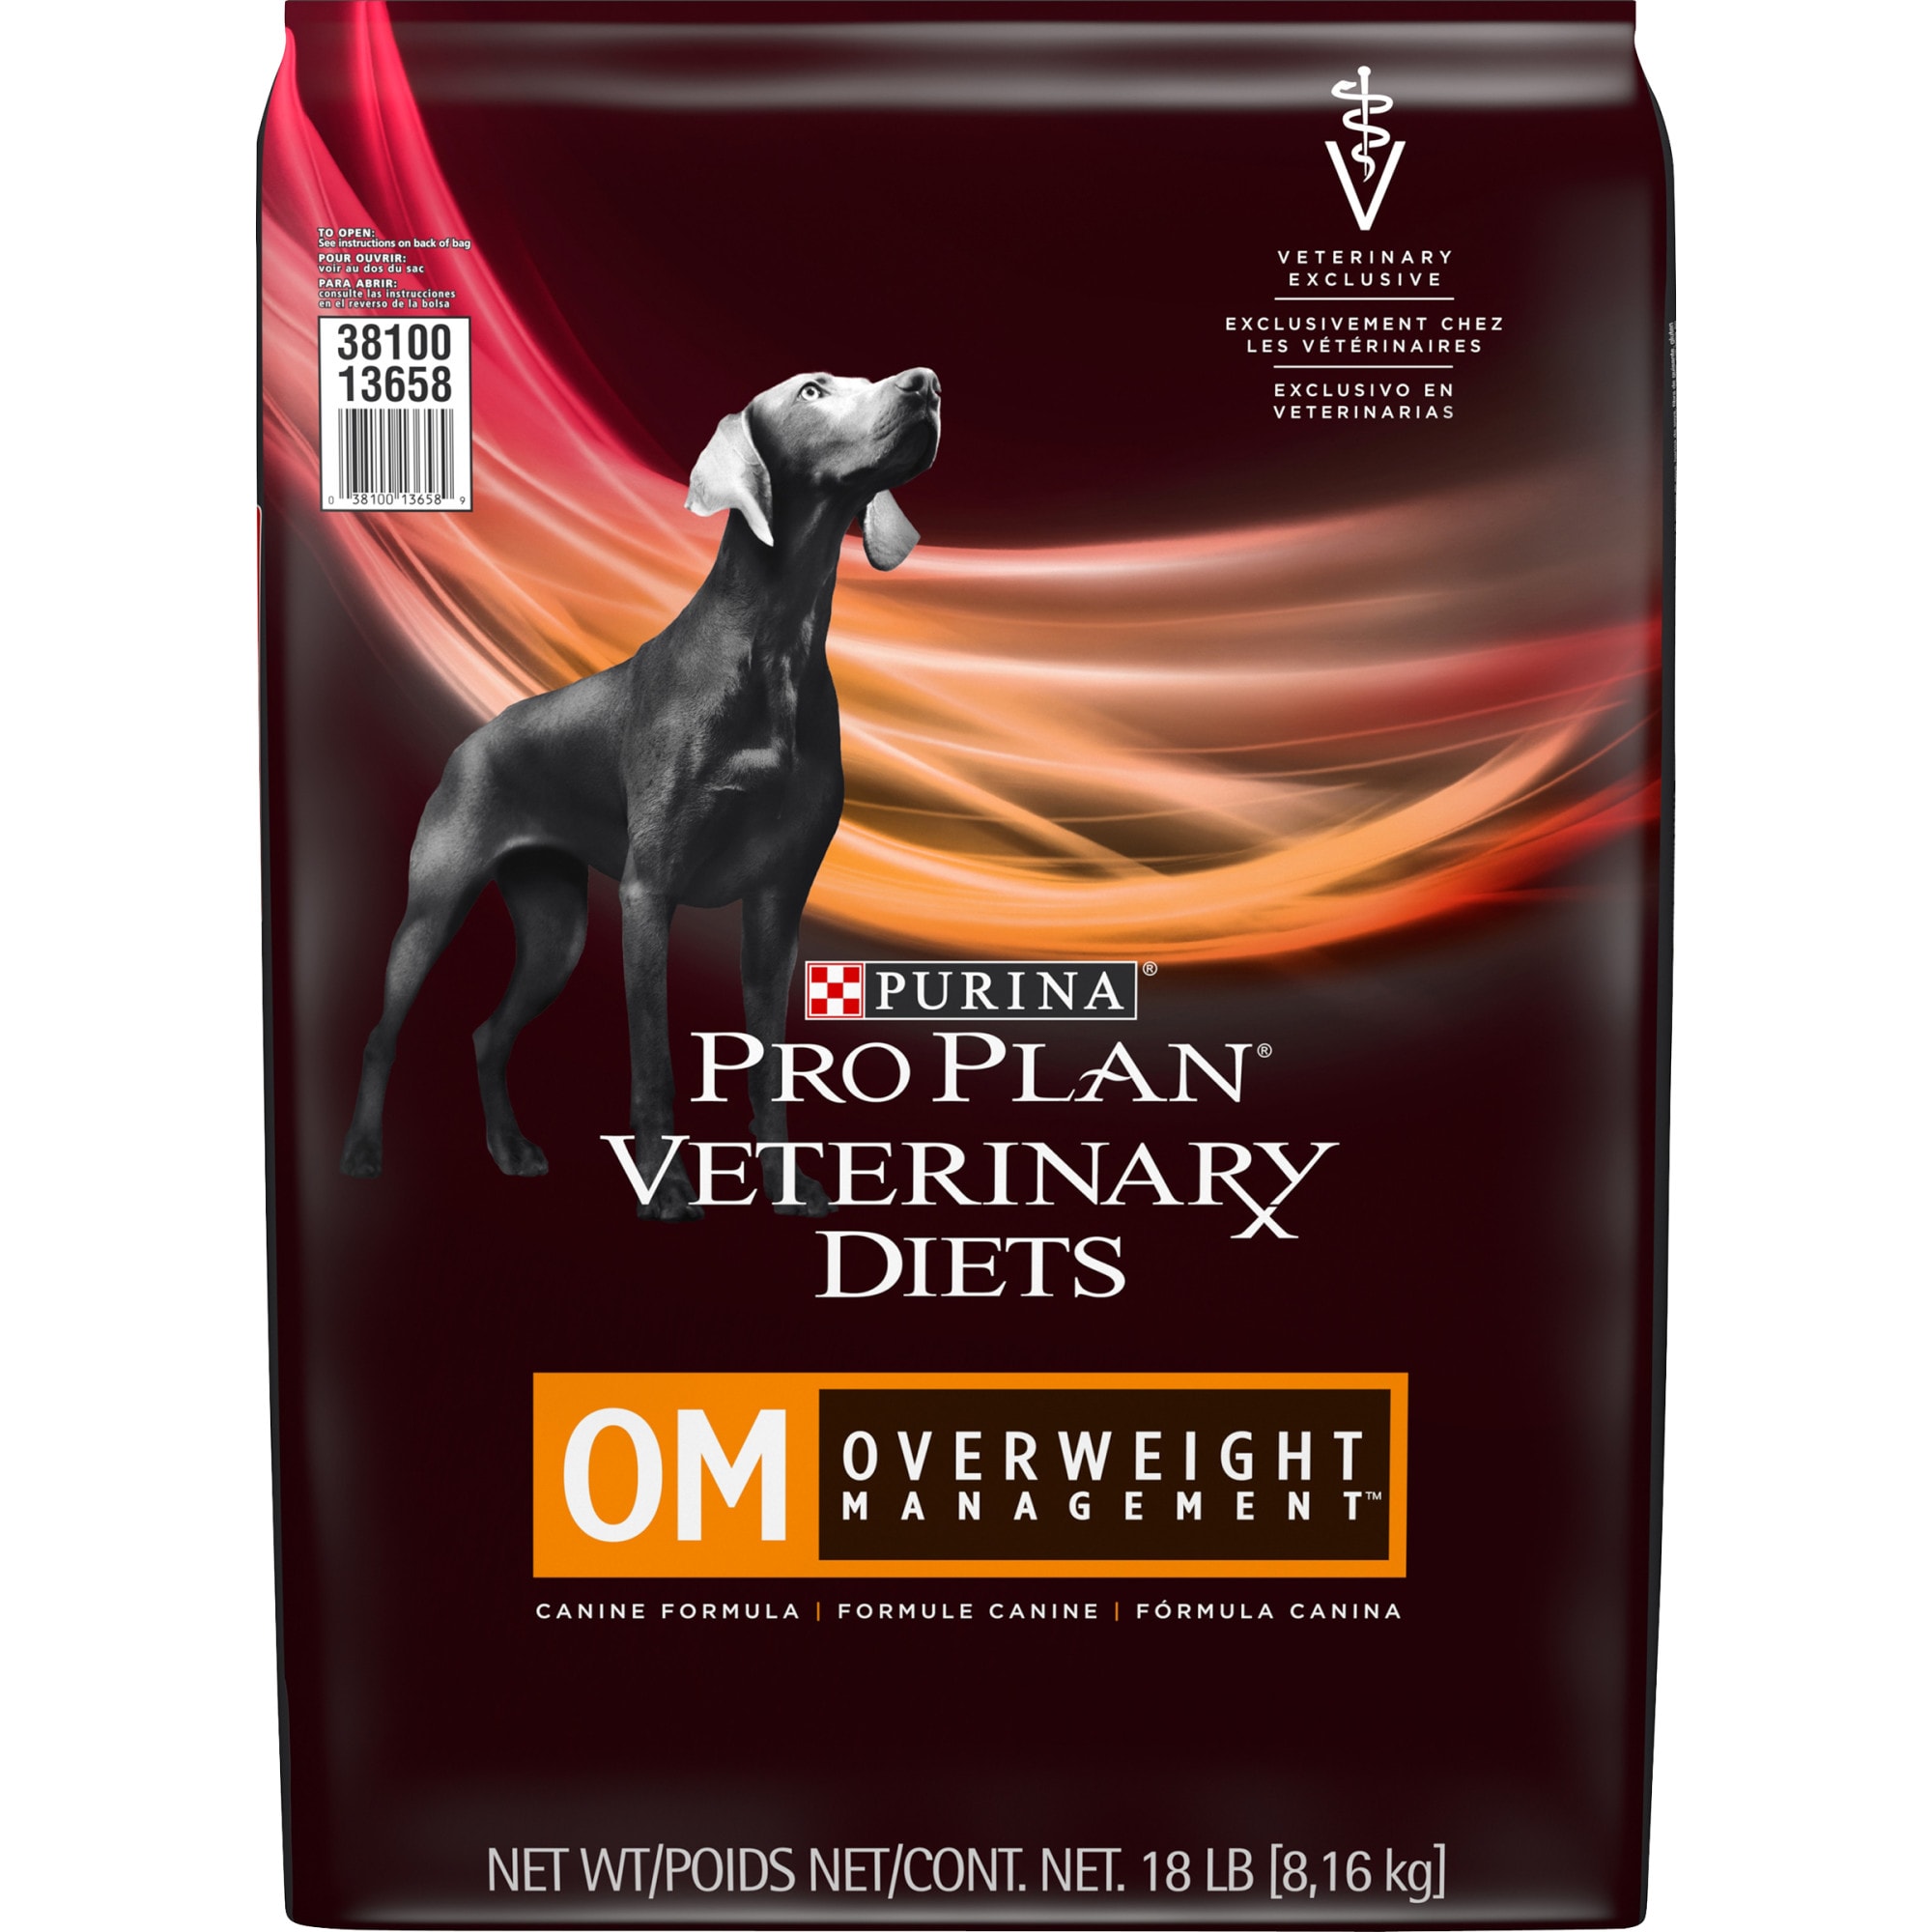 Purina Pro Plan Veterinary Diets OM Overweight Management Canine